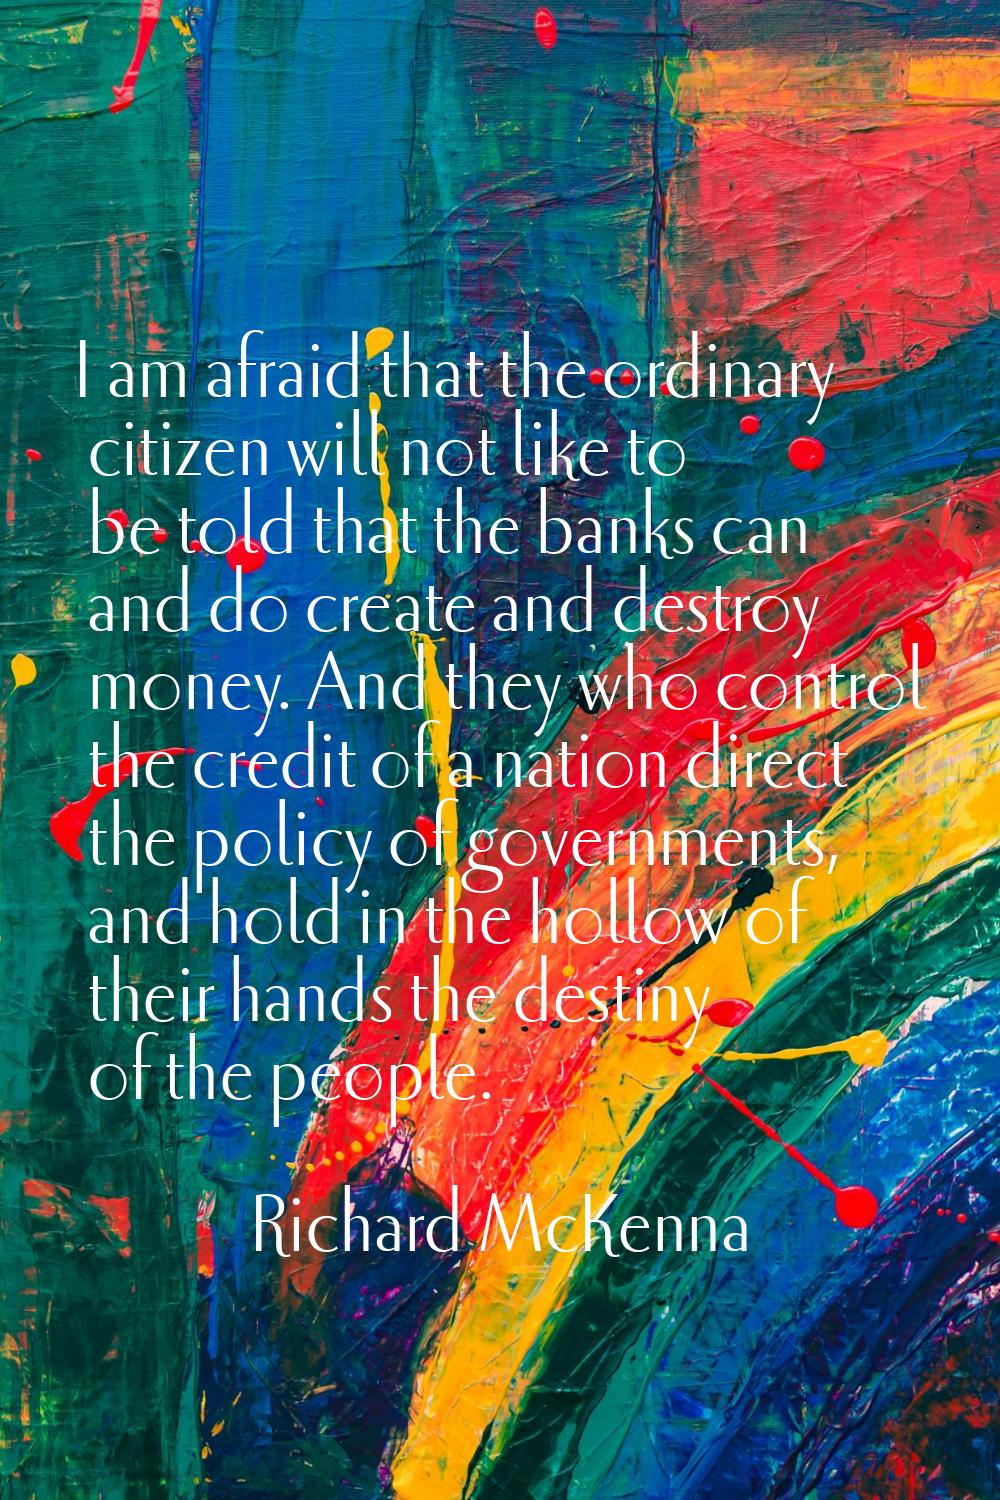 I am afraid that the ordinary citizen will not like to be told that the banks can and do create and